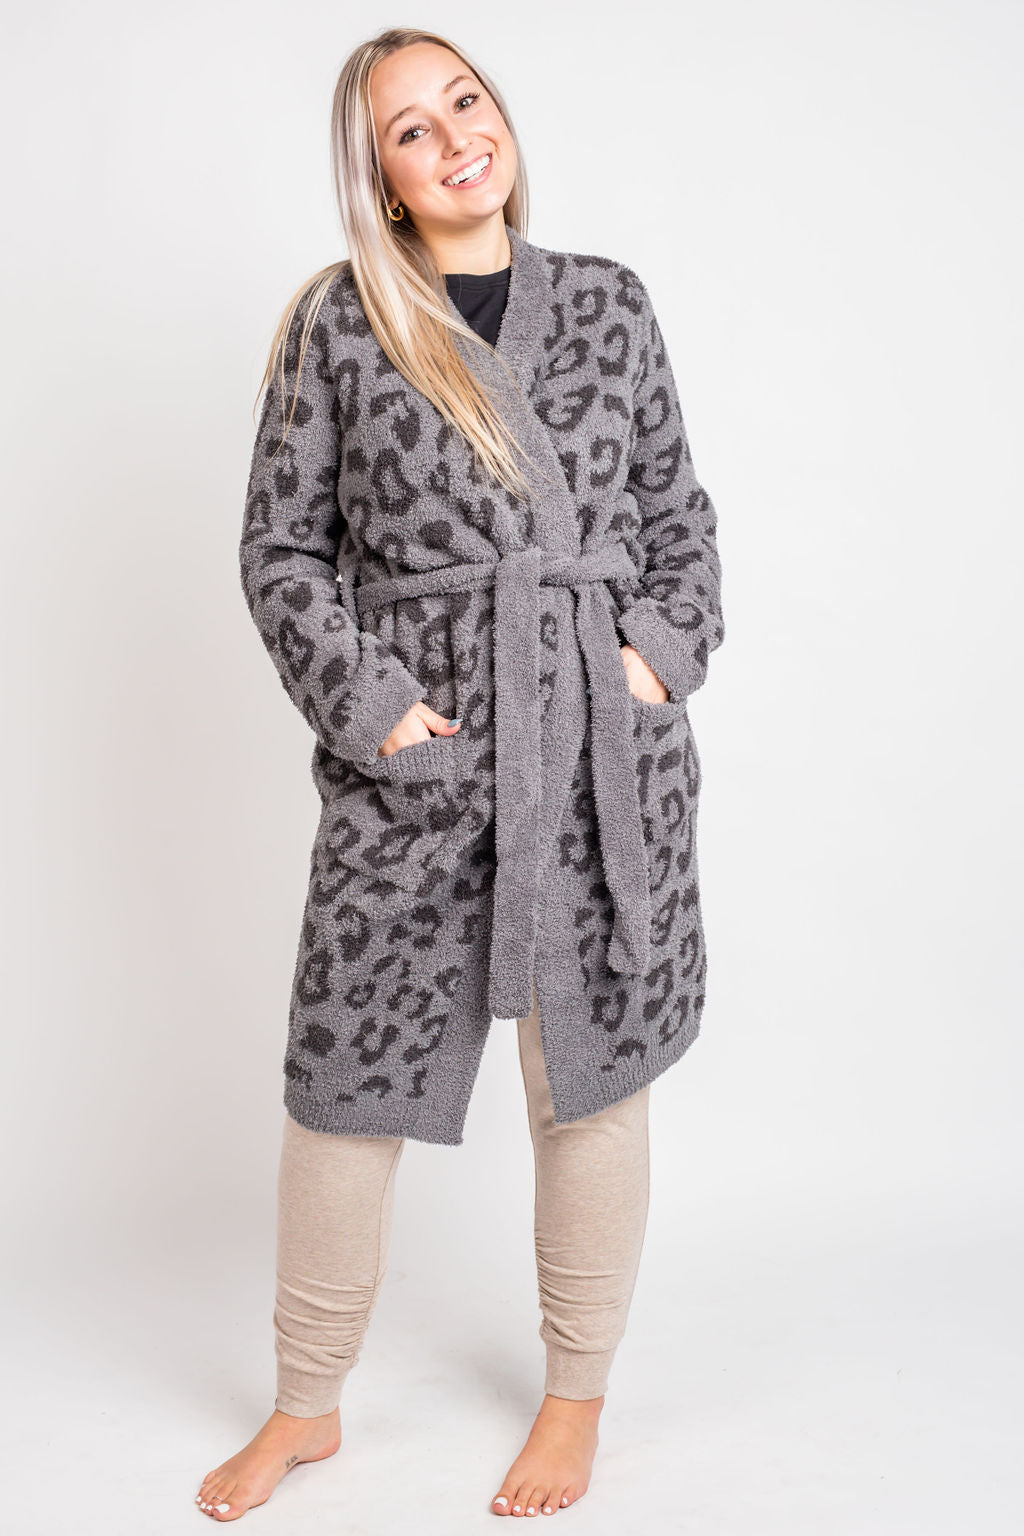 Barefoot Dreams CozyChic In The Wild Robe Loungewear in  at Wrapsody